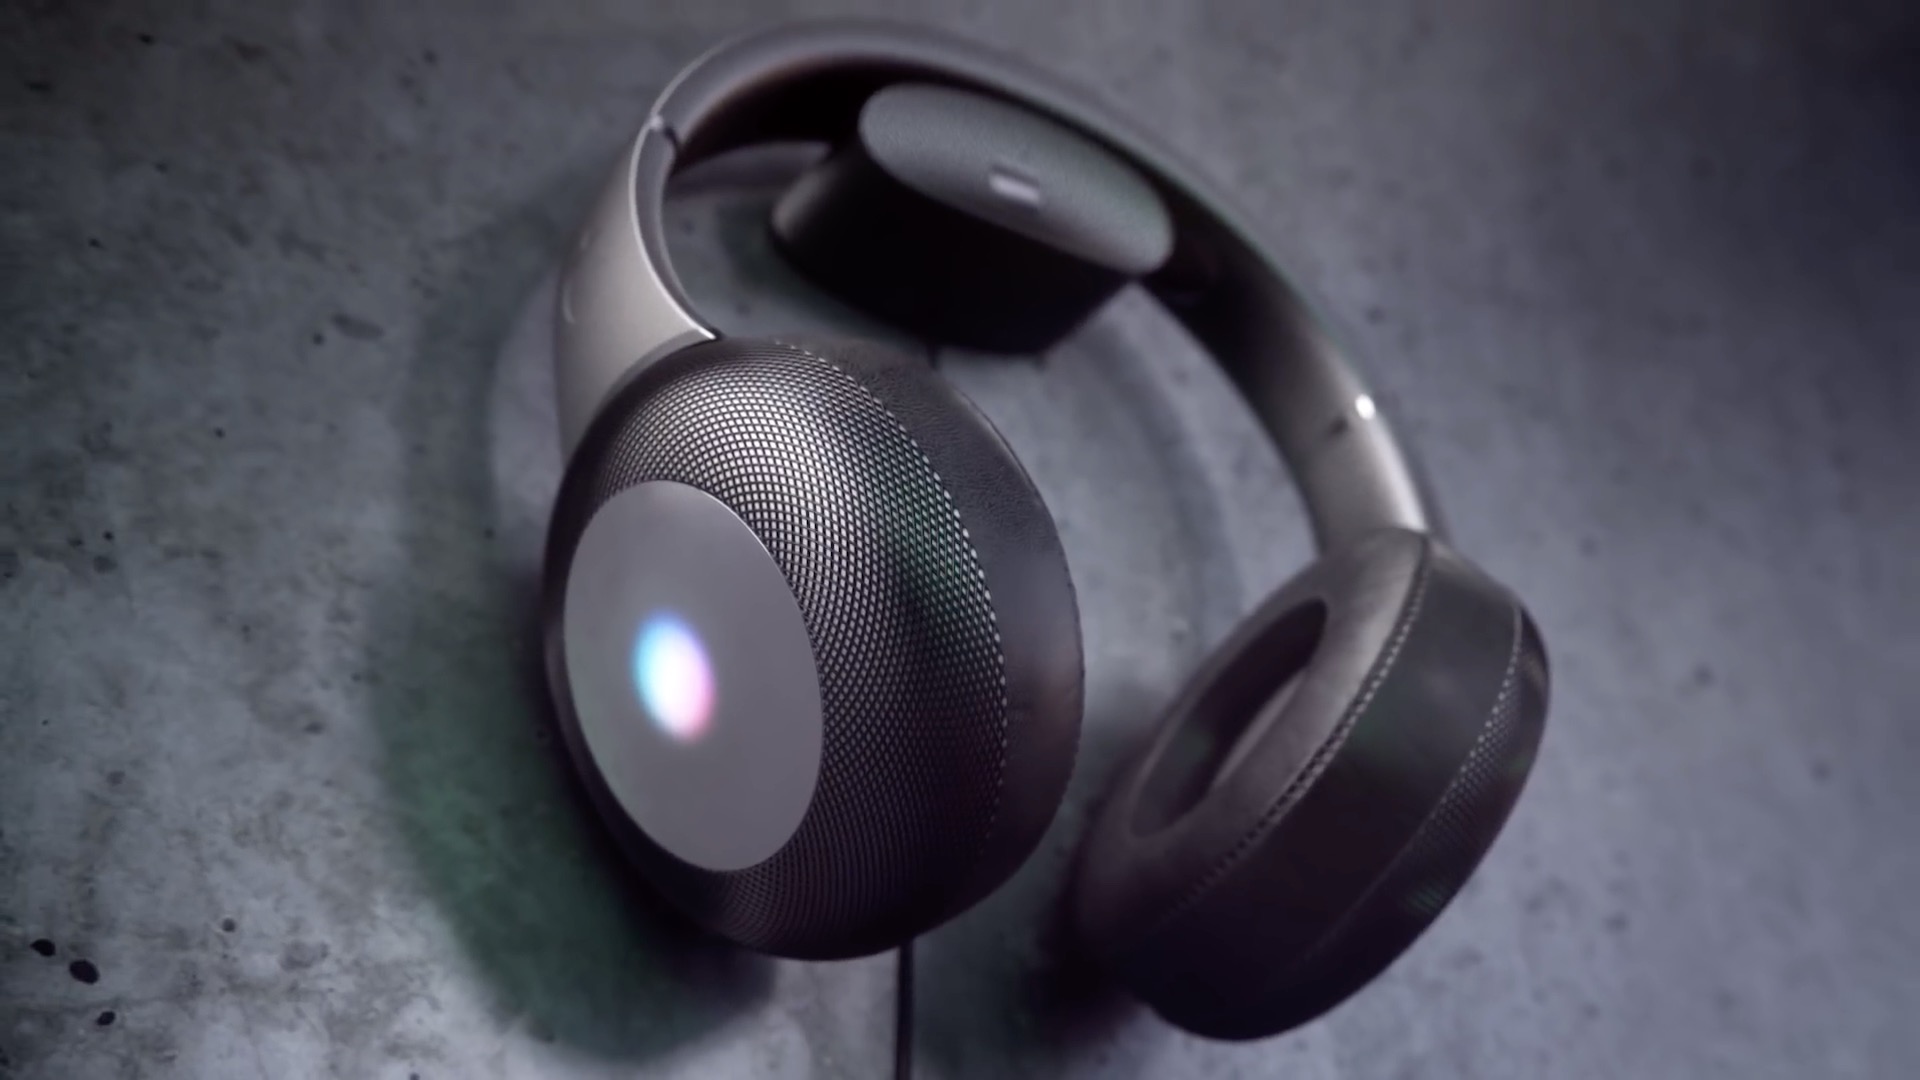 Apple Over Ear Headphones Concept Images 4